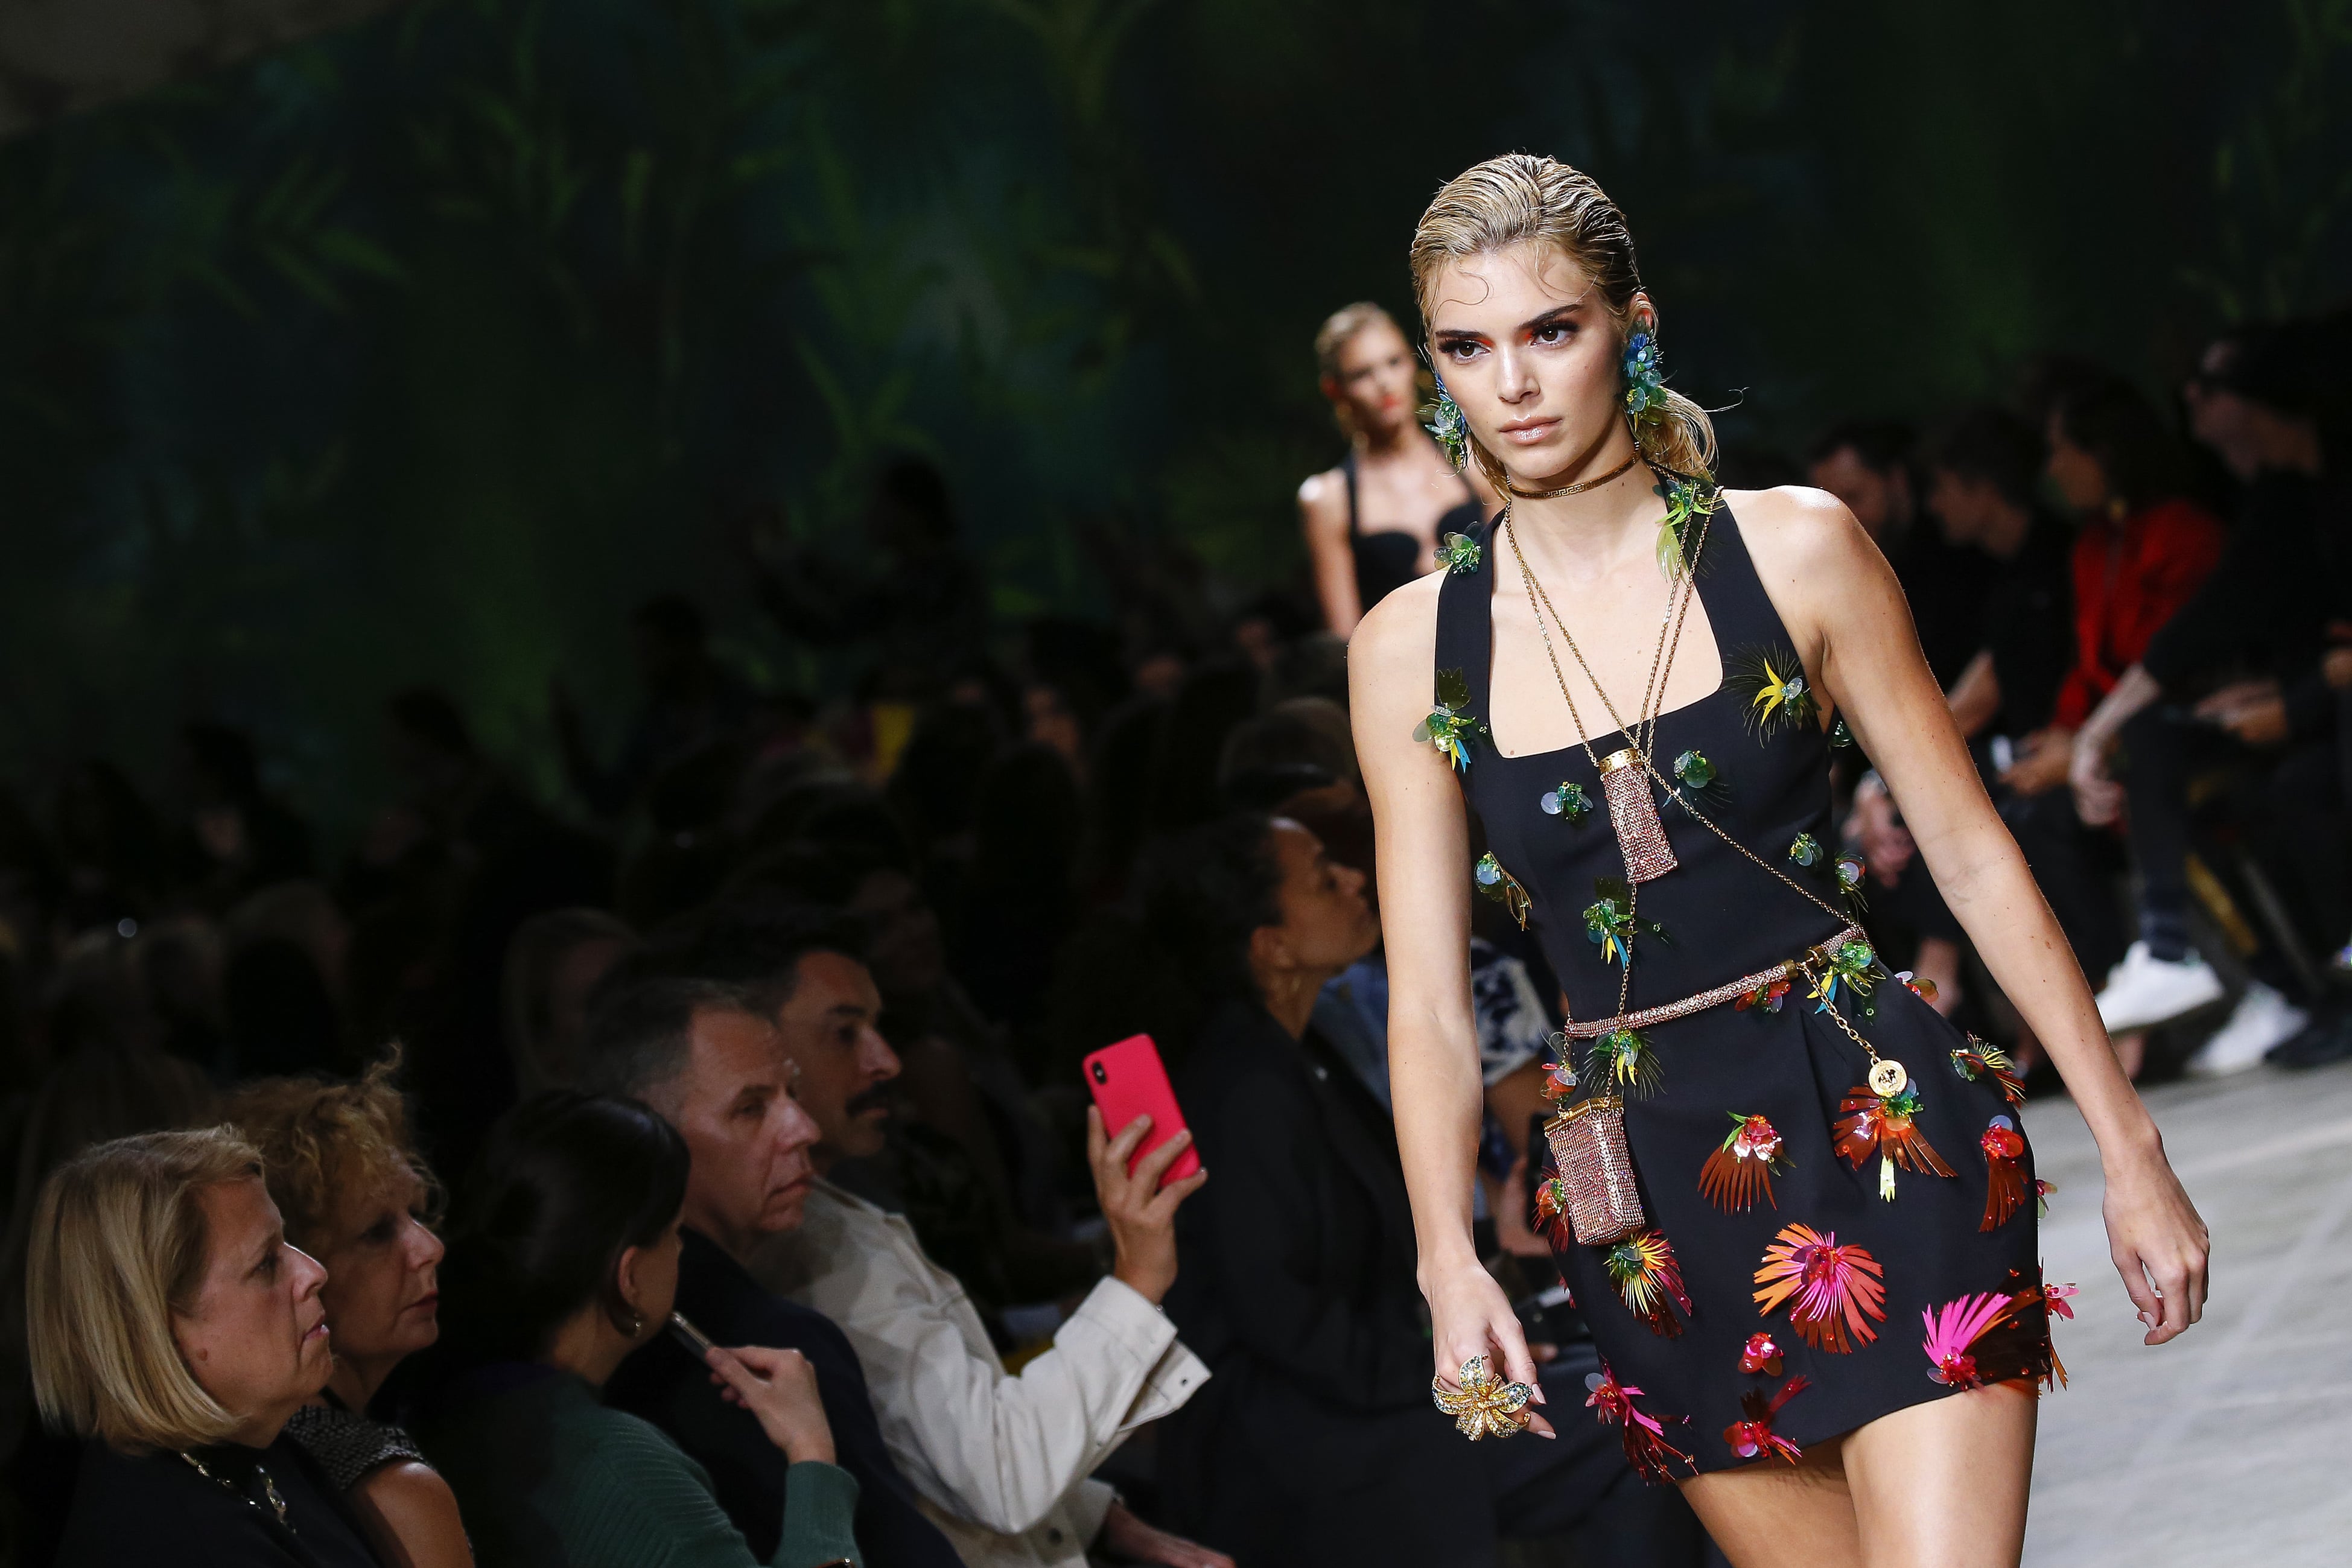 Kendall Jenner Walking for Versace Spring/Summer 2020 at Milan Fashion Week, Kendall Jenner Walked the Fendi Runway Like a Boss in Blond Hair and a  Sheer Blouse